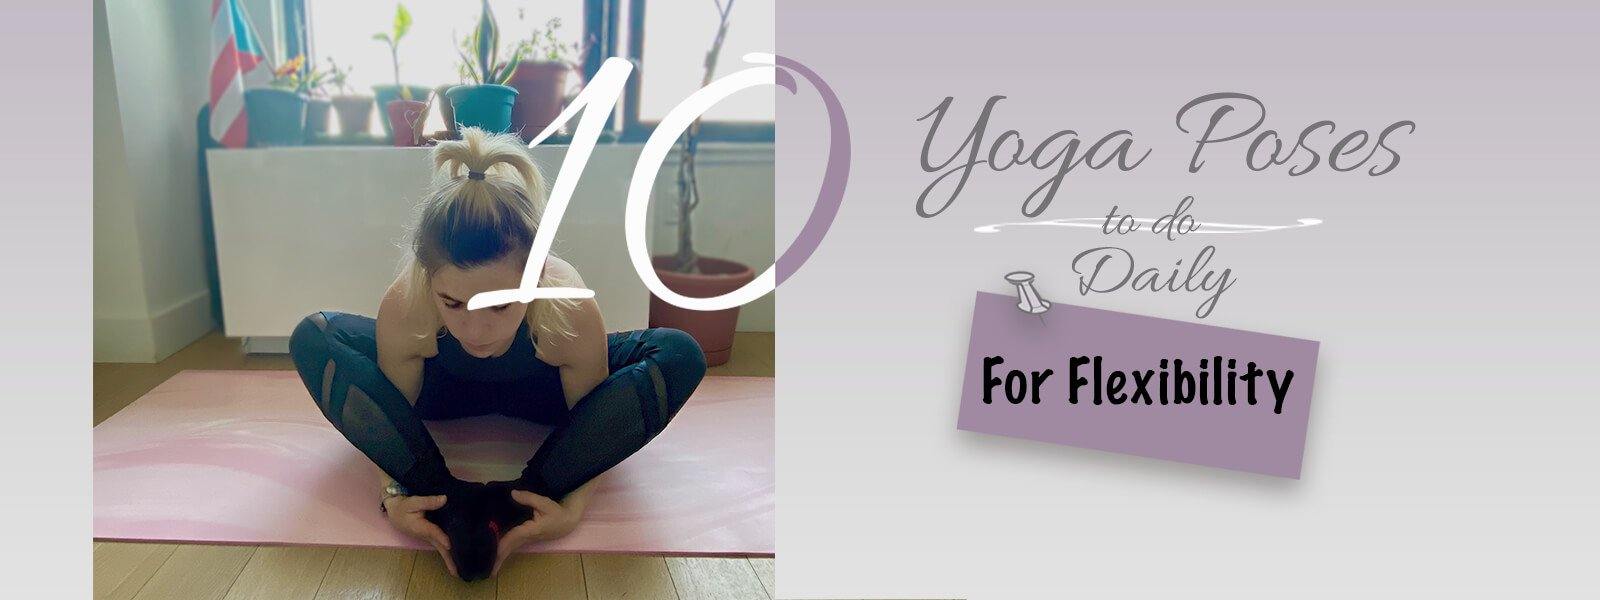 5 Basic Yoga Poses to Start a Daily Practice at Home